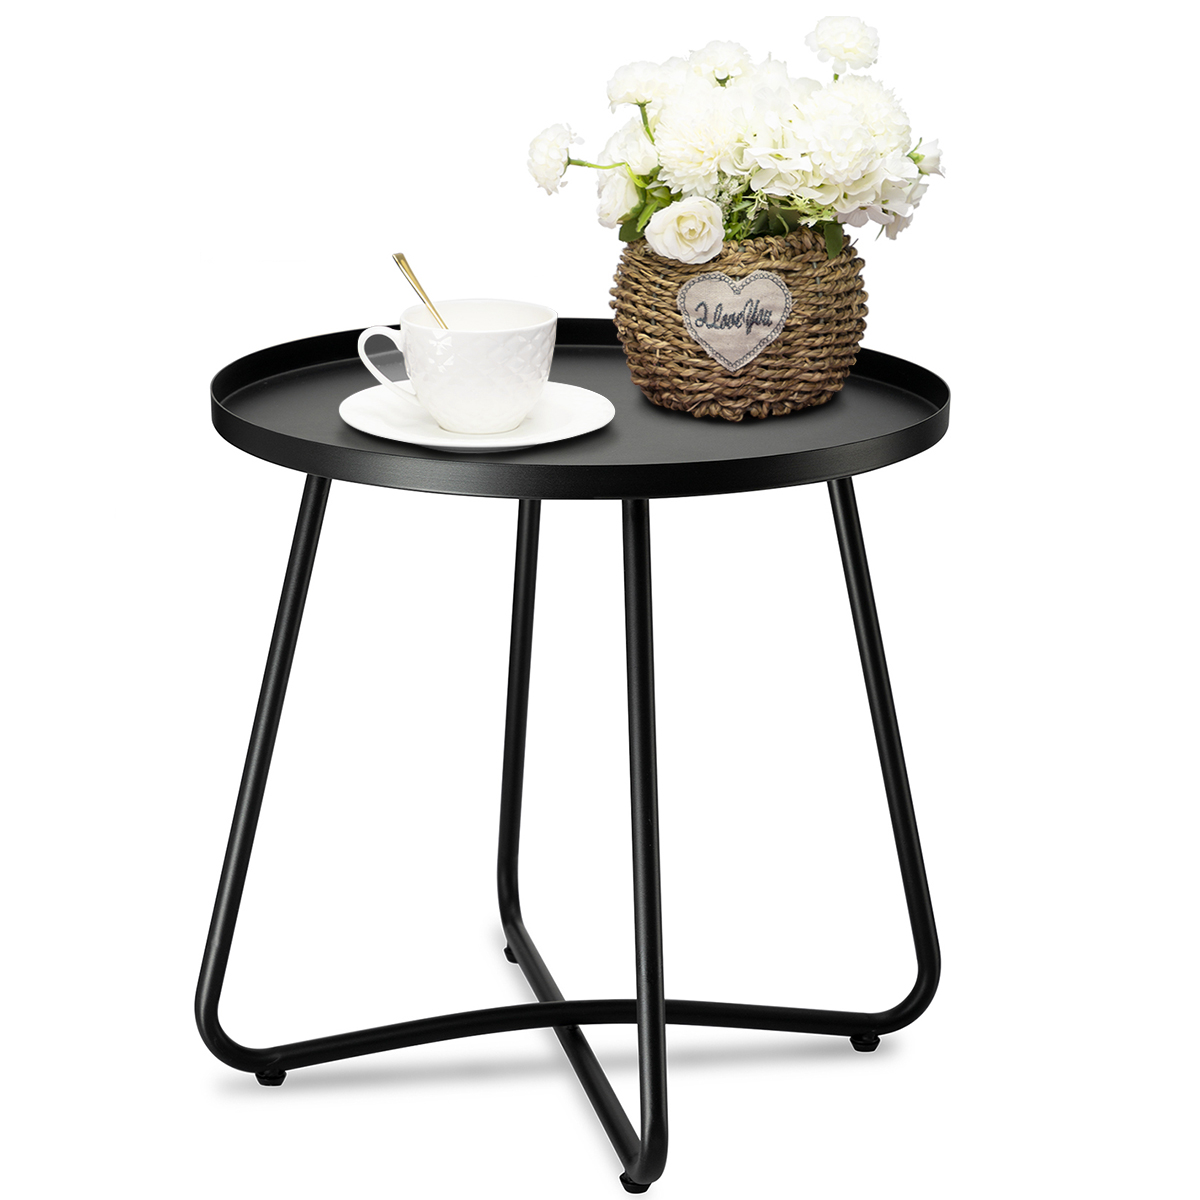 danpinera Outdoor Side Table, Small Round End Table with Weather Resistant Steel for Patio,Yard,Balcony,Garden - Black - image 1 of 9